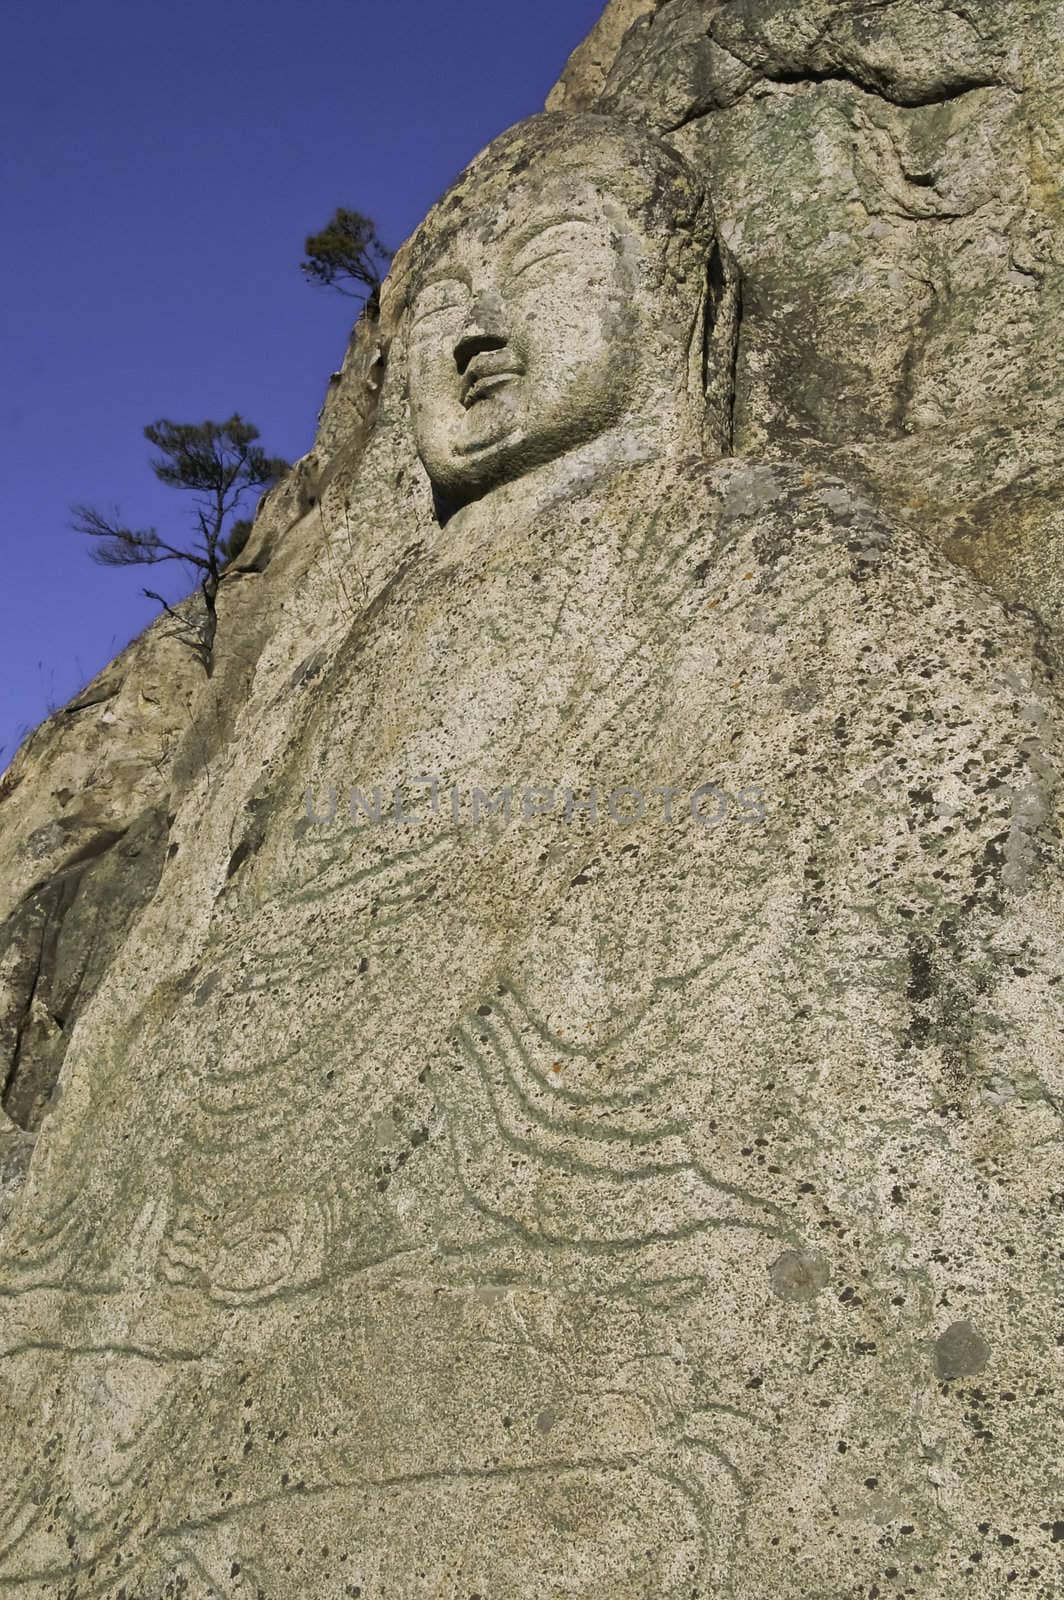 Ancient stone buddha carved into a hillside in Korea